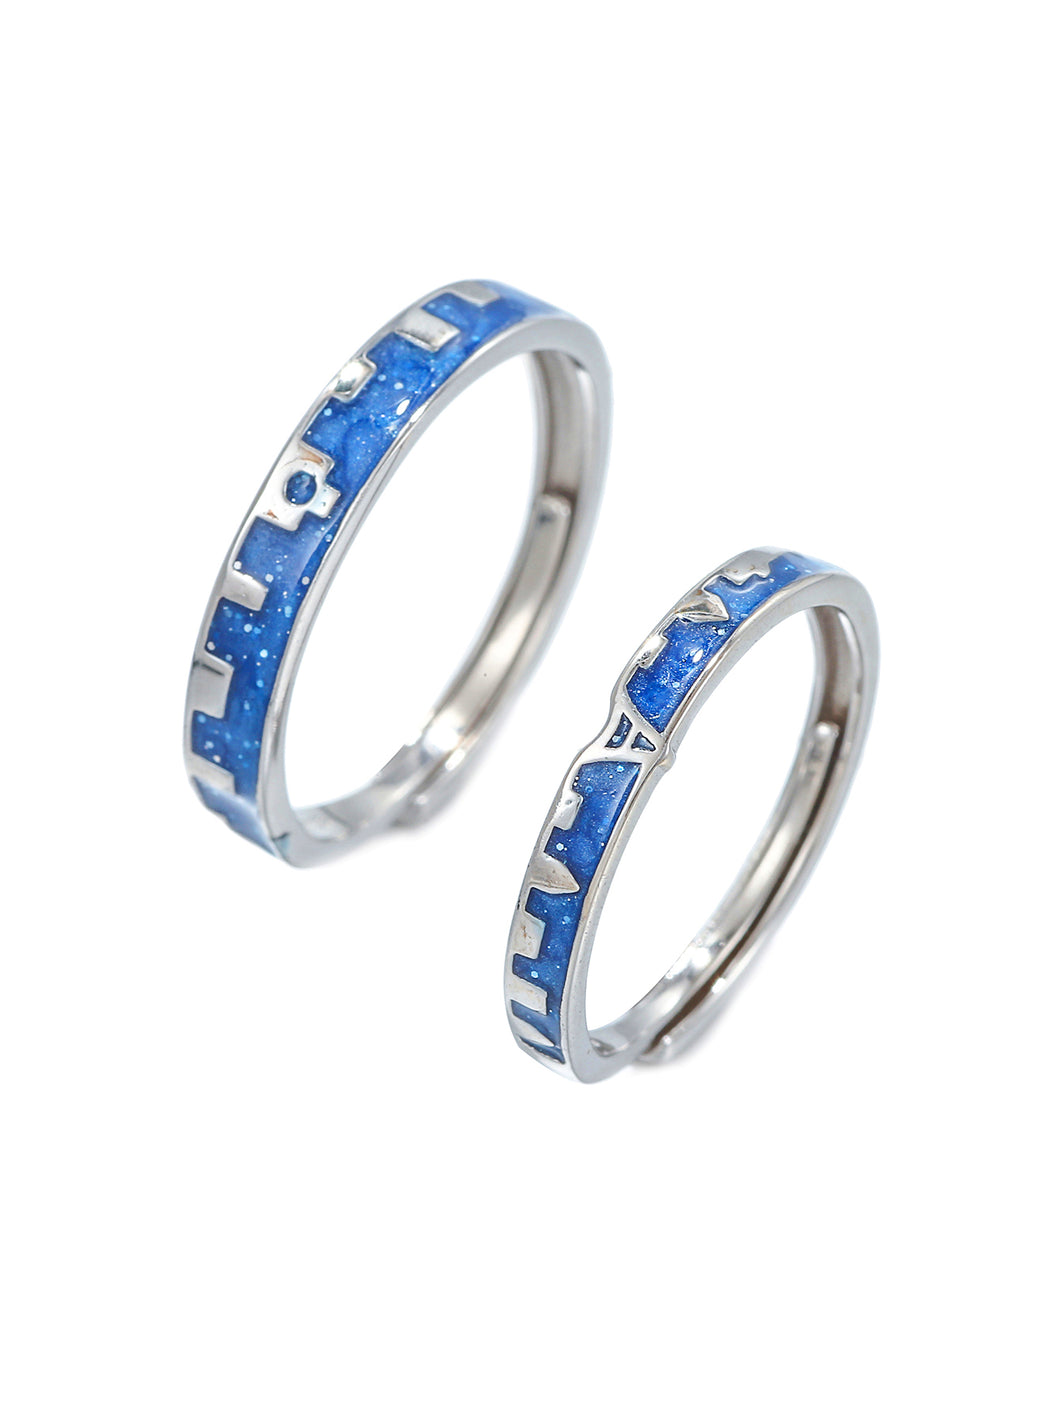 2pcs Couple Textured Silver Ring